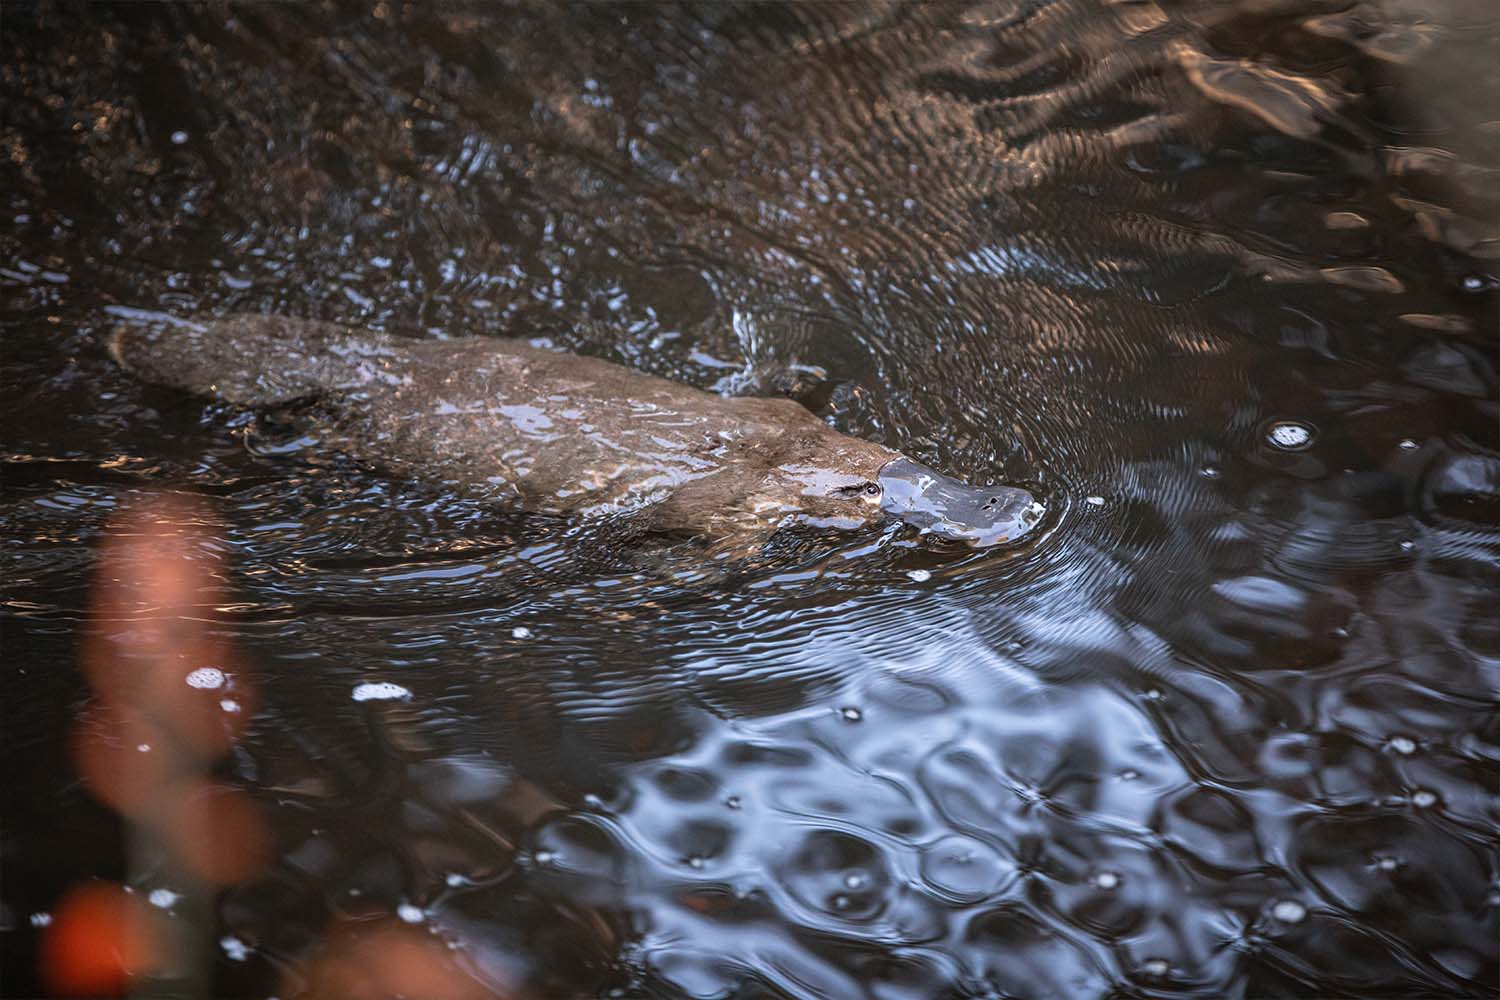 The Derwent River is home to a healthy population of platypuses.